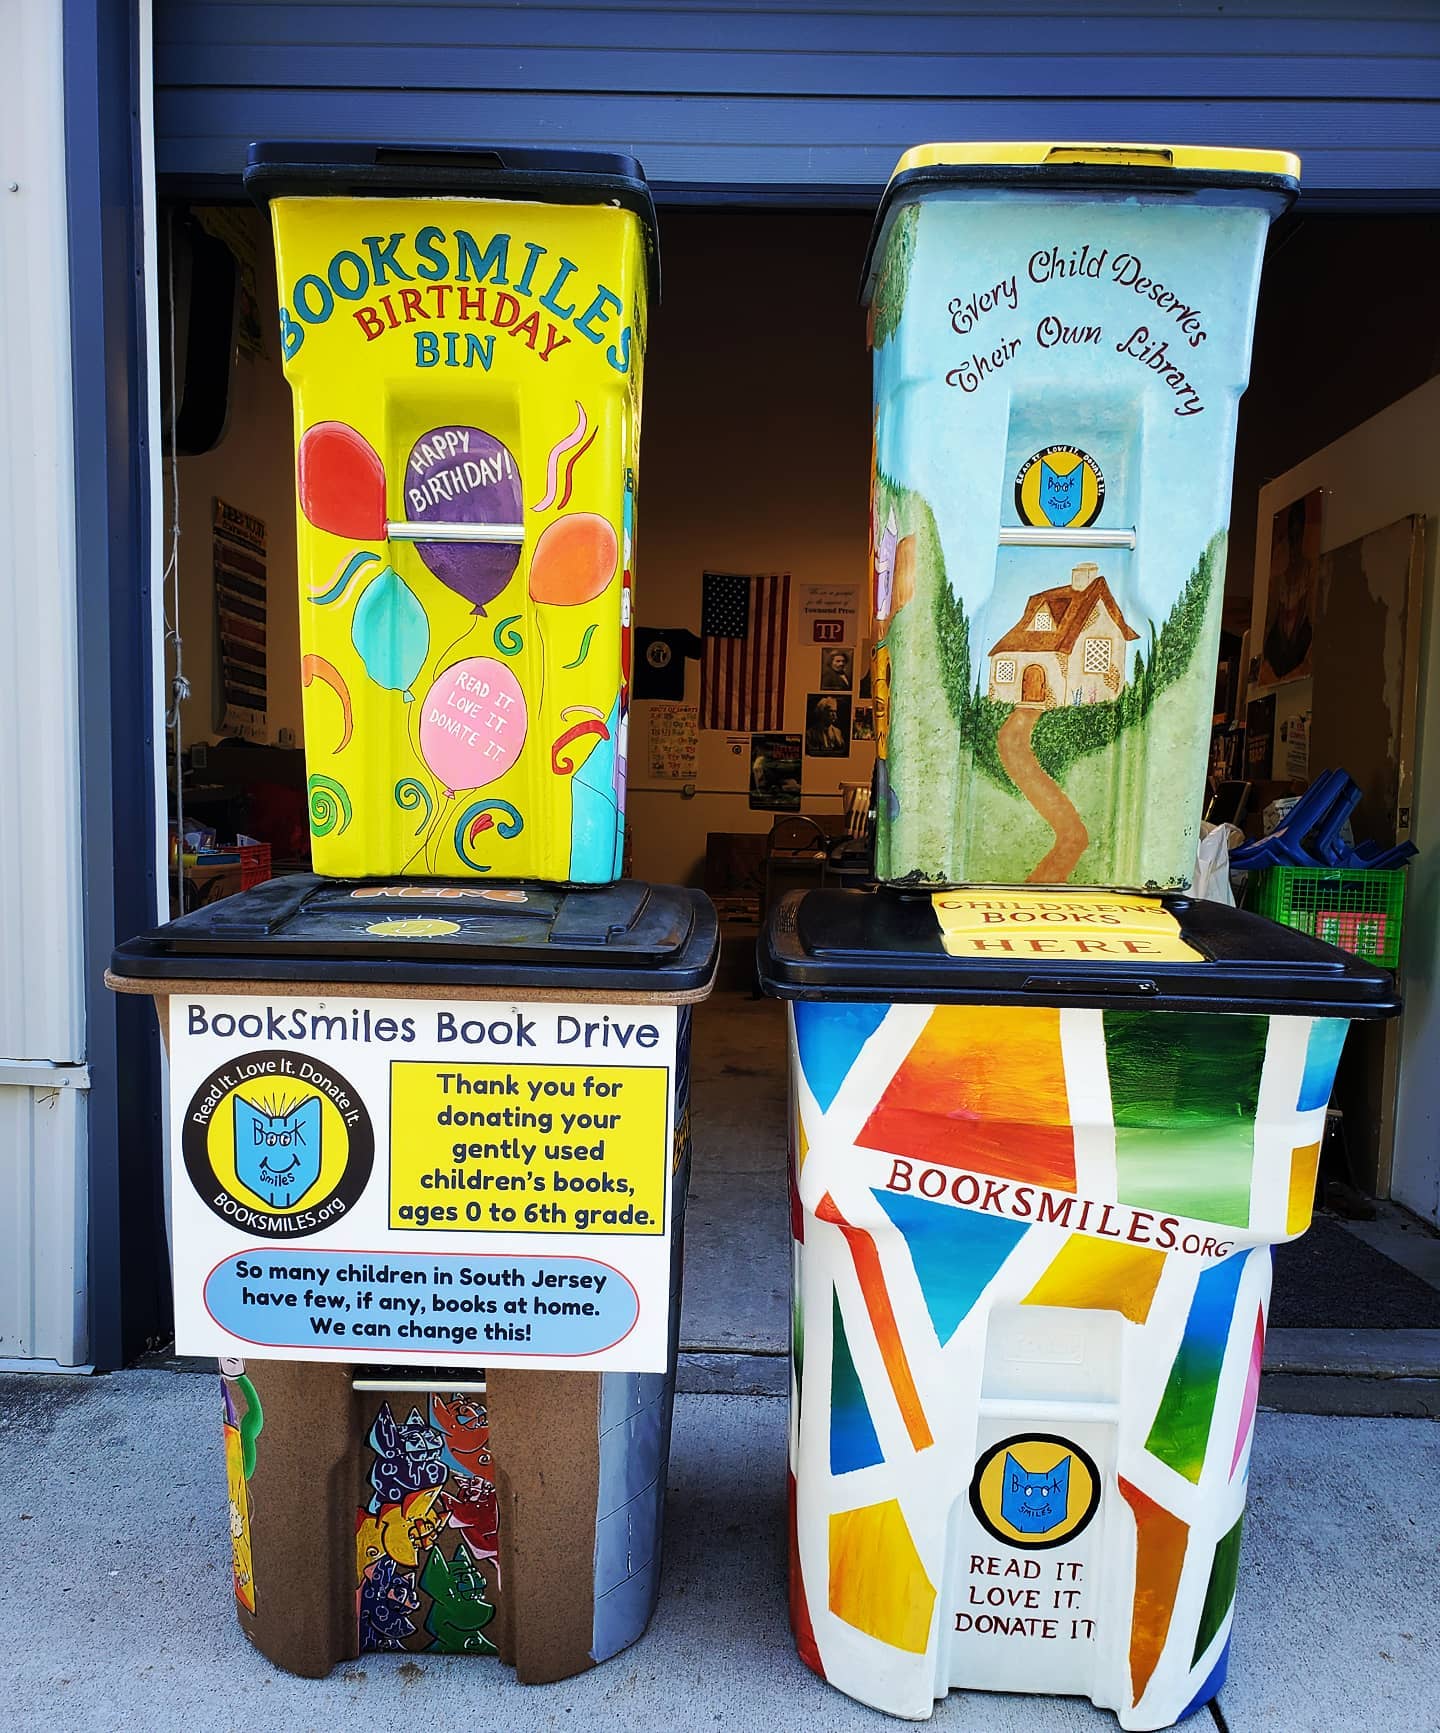 A few of BookSmiles' hand-painted book collection bins. They are colorful, stacked two by two.